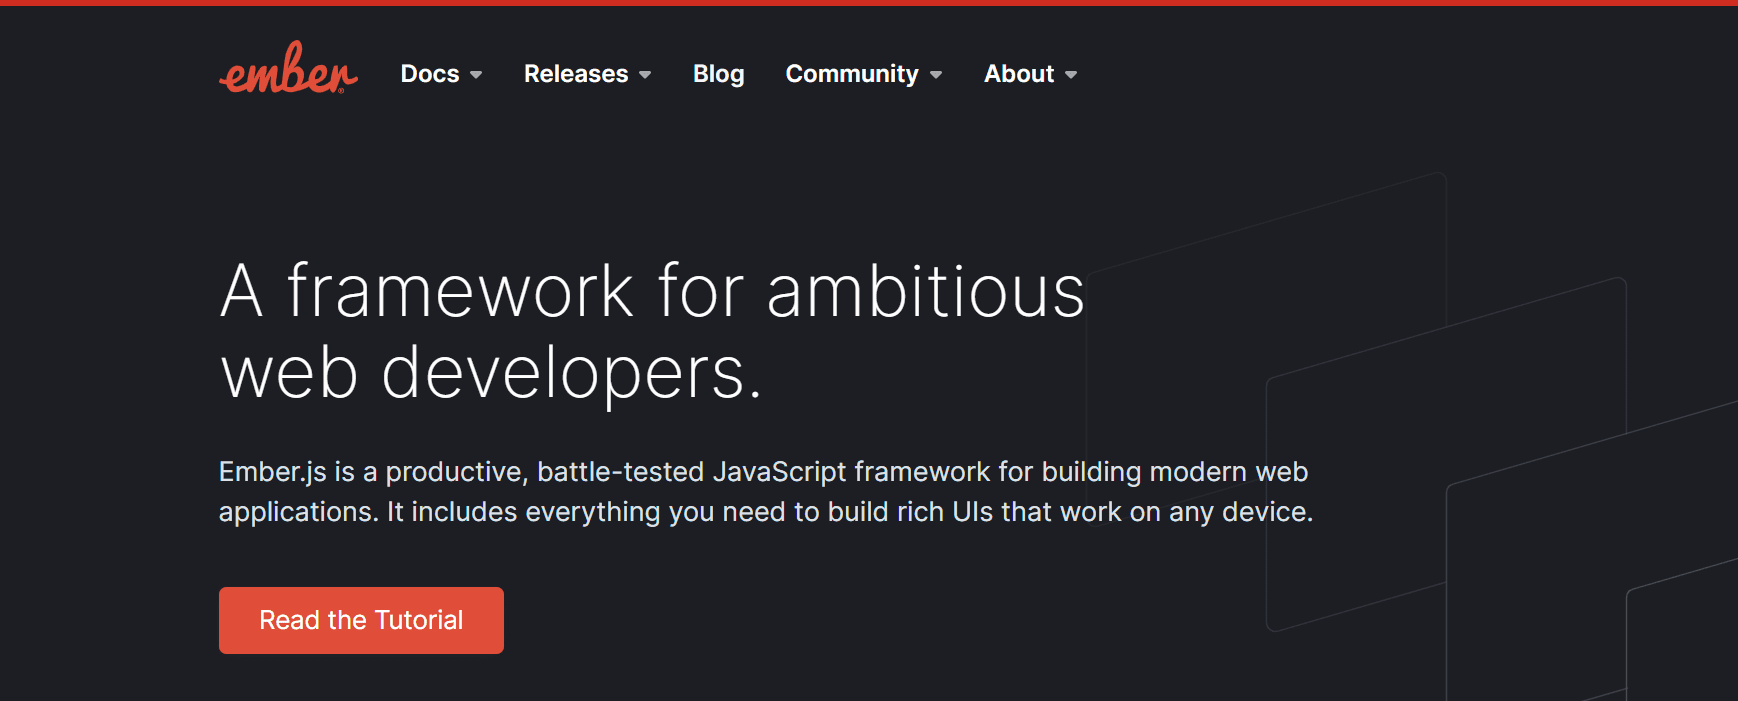 Ember : A framework for ambitious web developers.